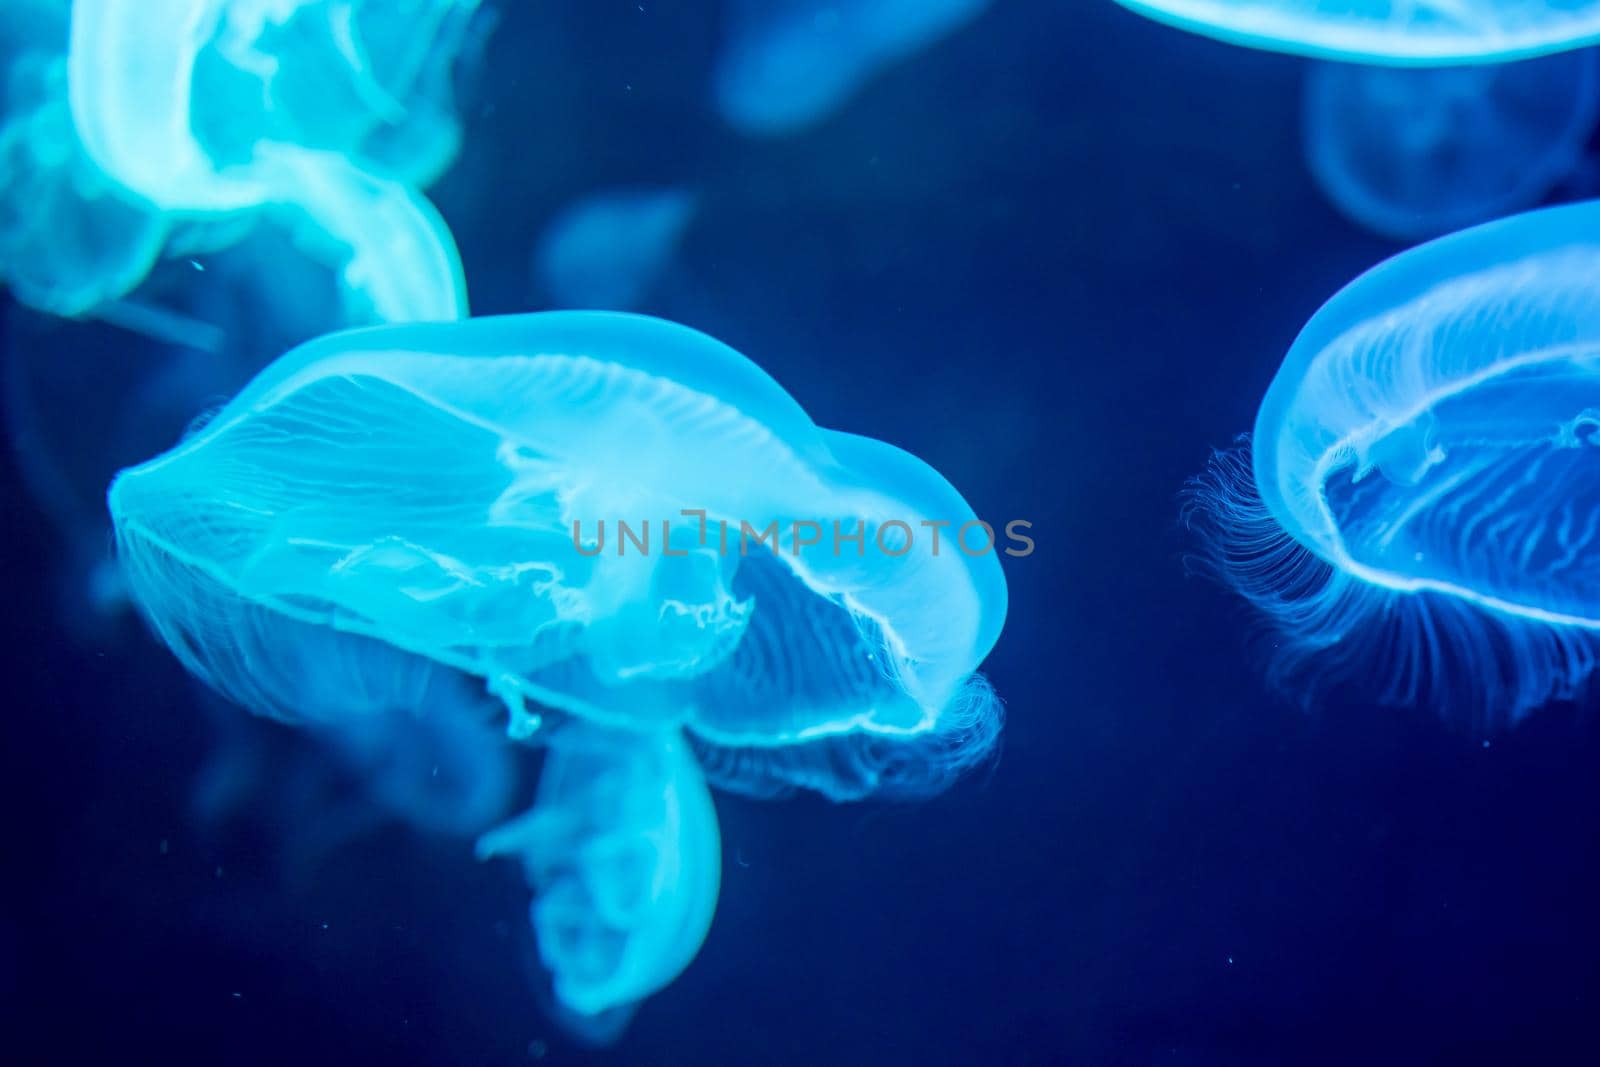 Blurry Colorful Jellyfishes floating on waters. Blue Moon jellyfish Aurelia aurita by billroque